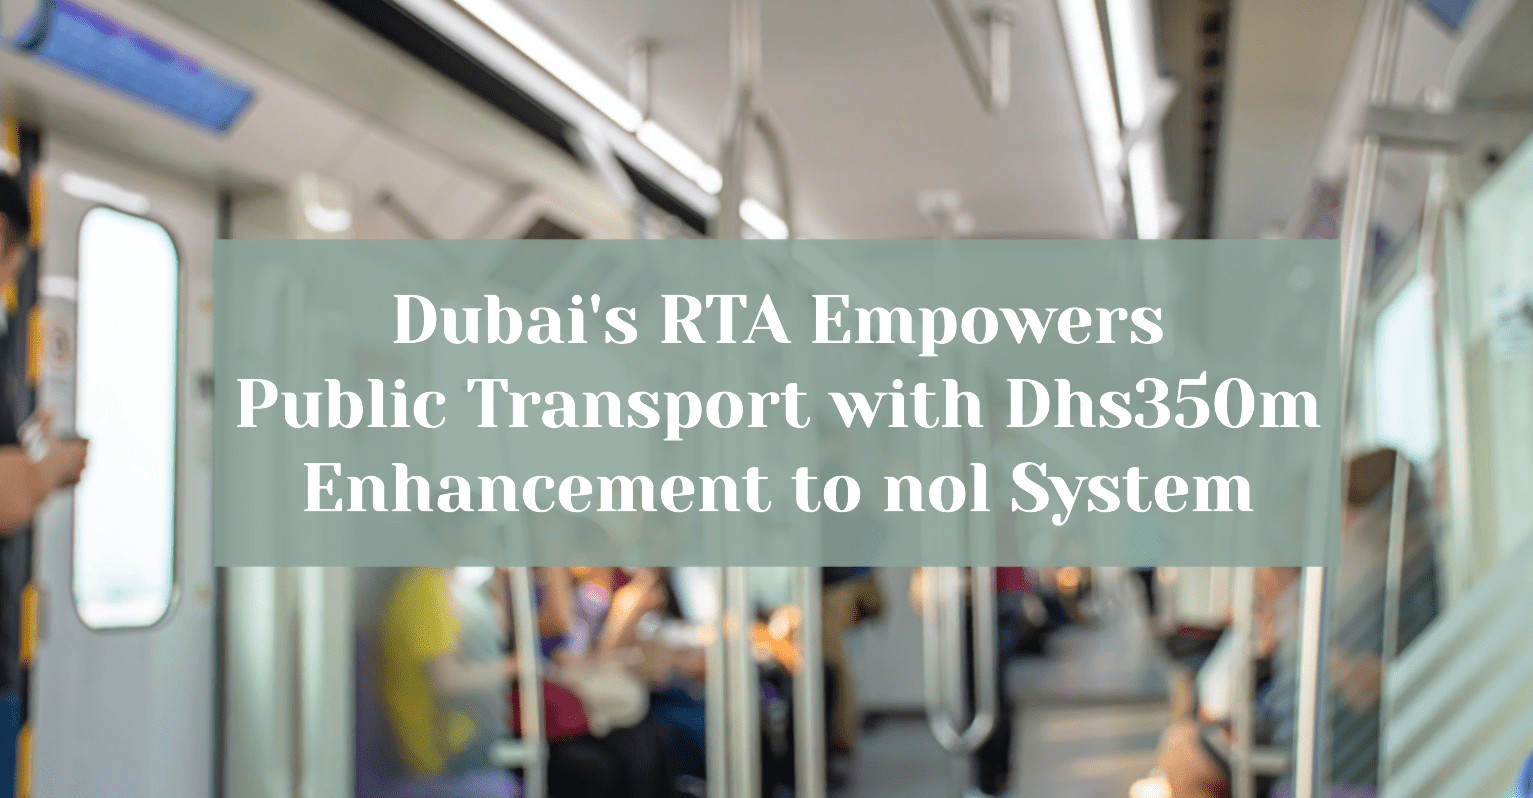 Dubai&#8217;s RTA Empowers Public Transport with Dhs350m Enhancement to NOL System